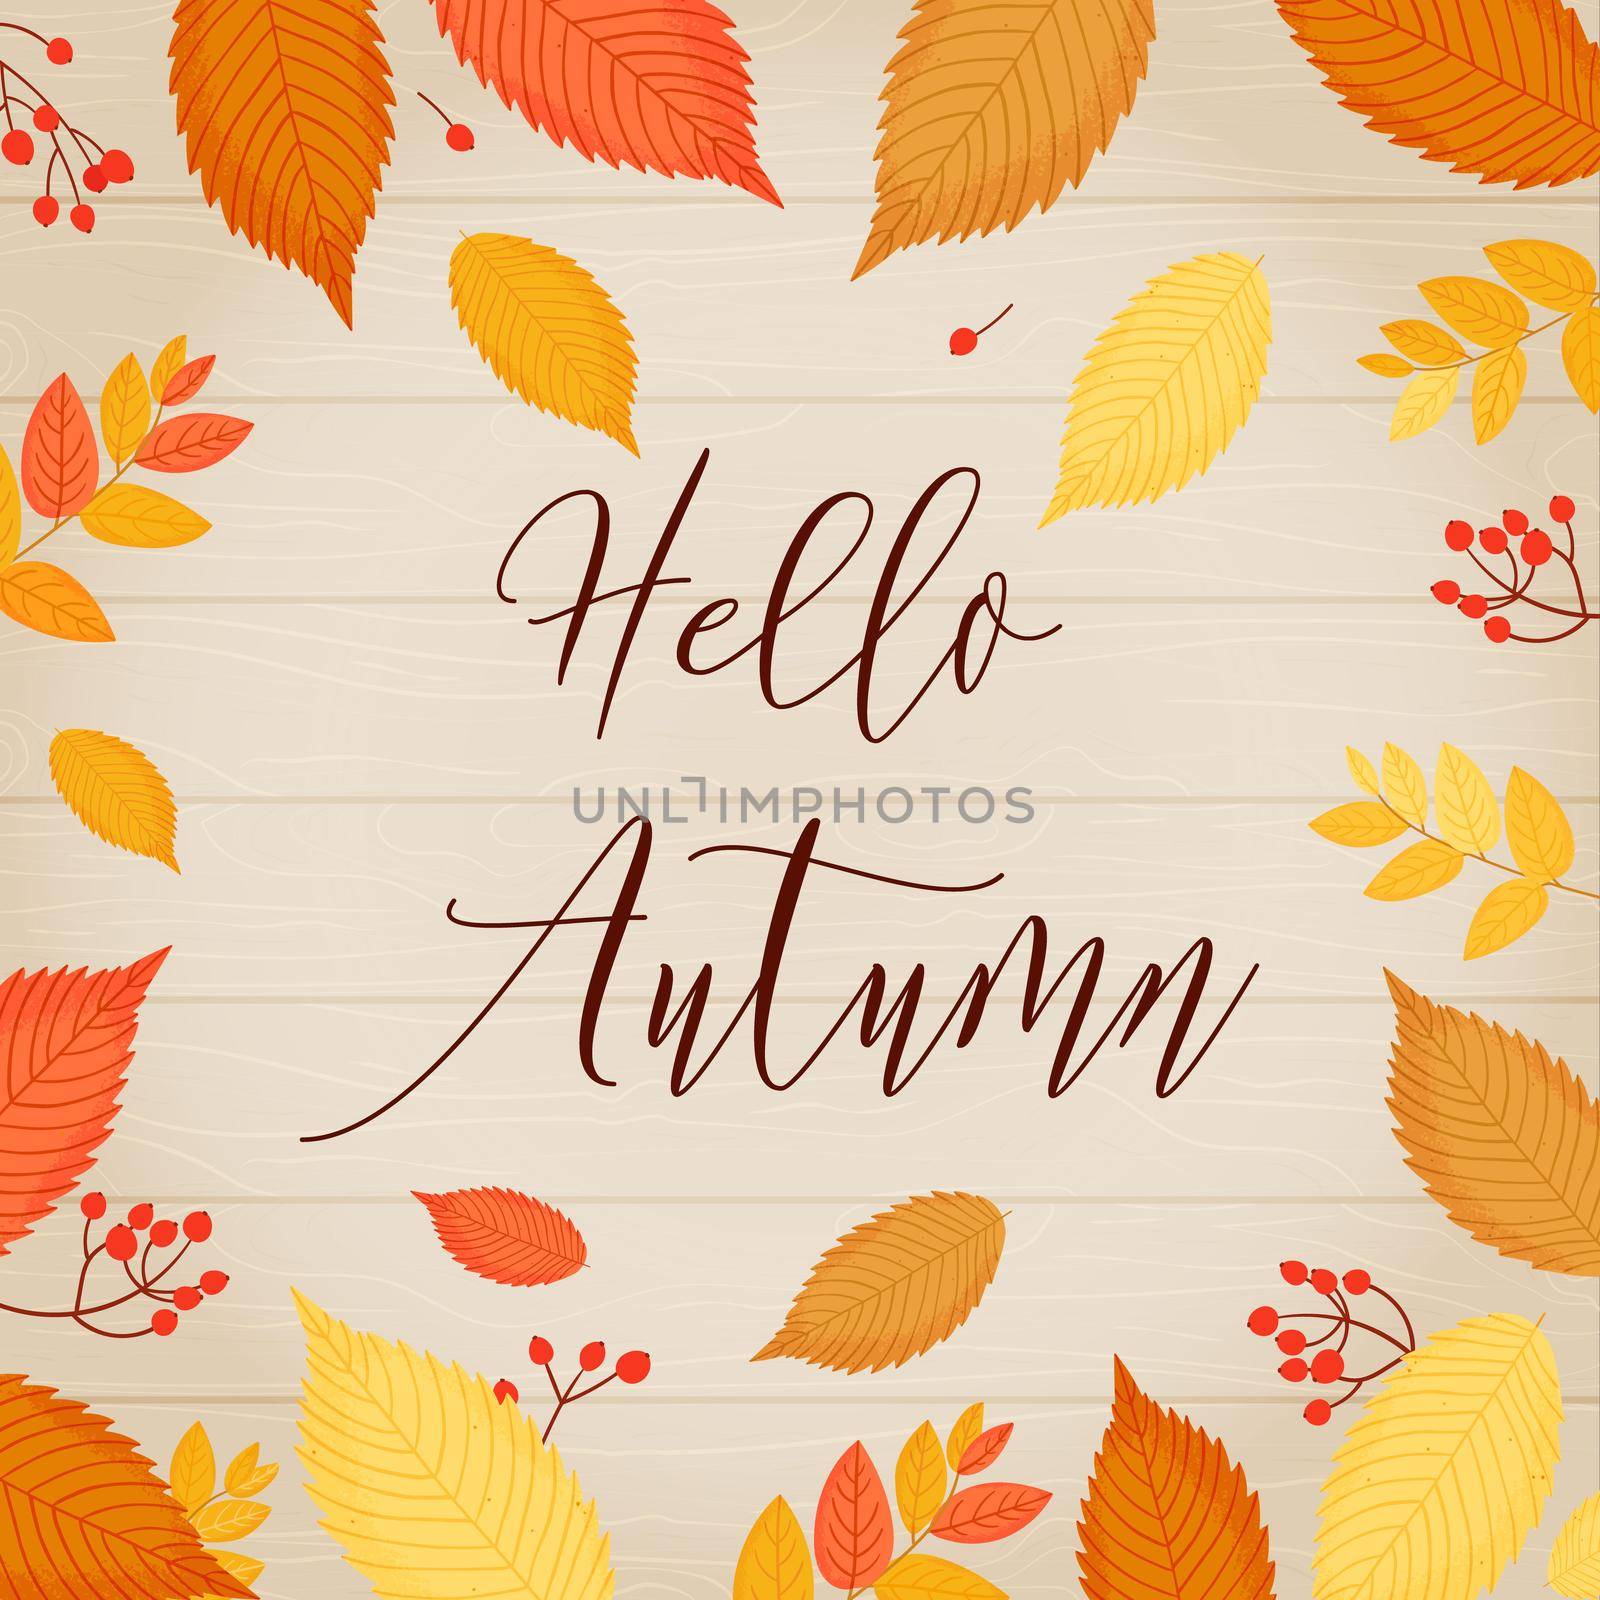 Hello, Autumn. Autumn template in a frame of leaves and berries and an inscription on a light wooden background. Perfect for postcards, invitations, banners, etc. Vector illustration.